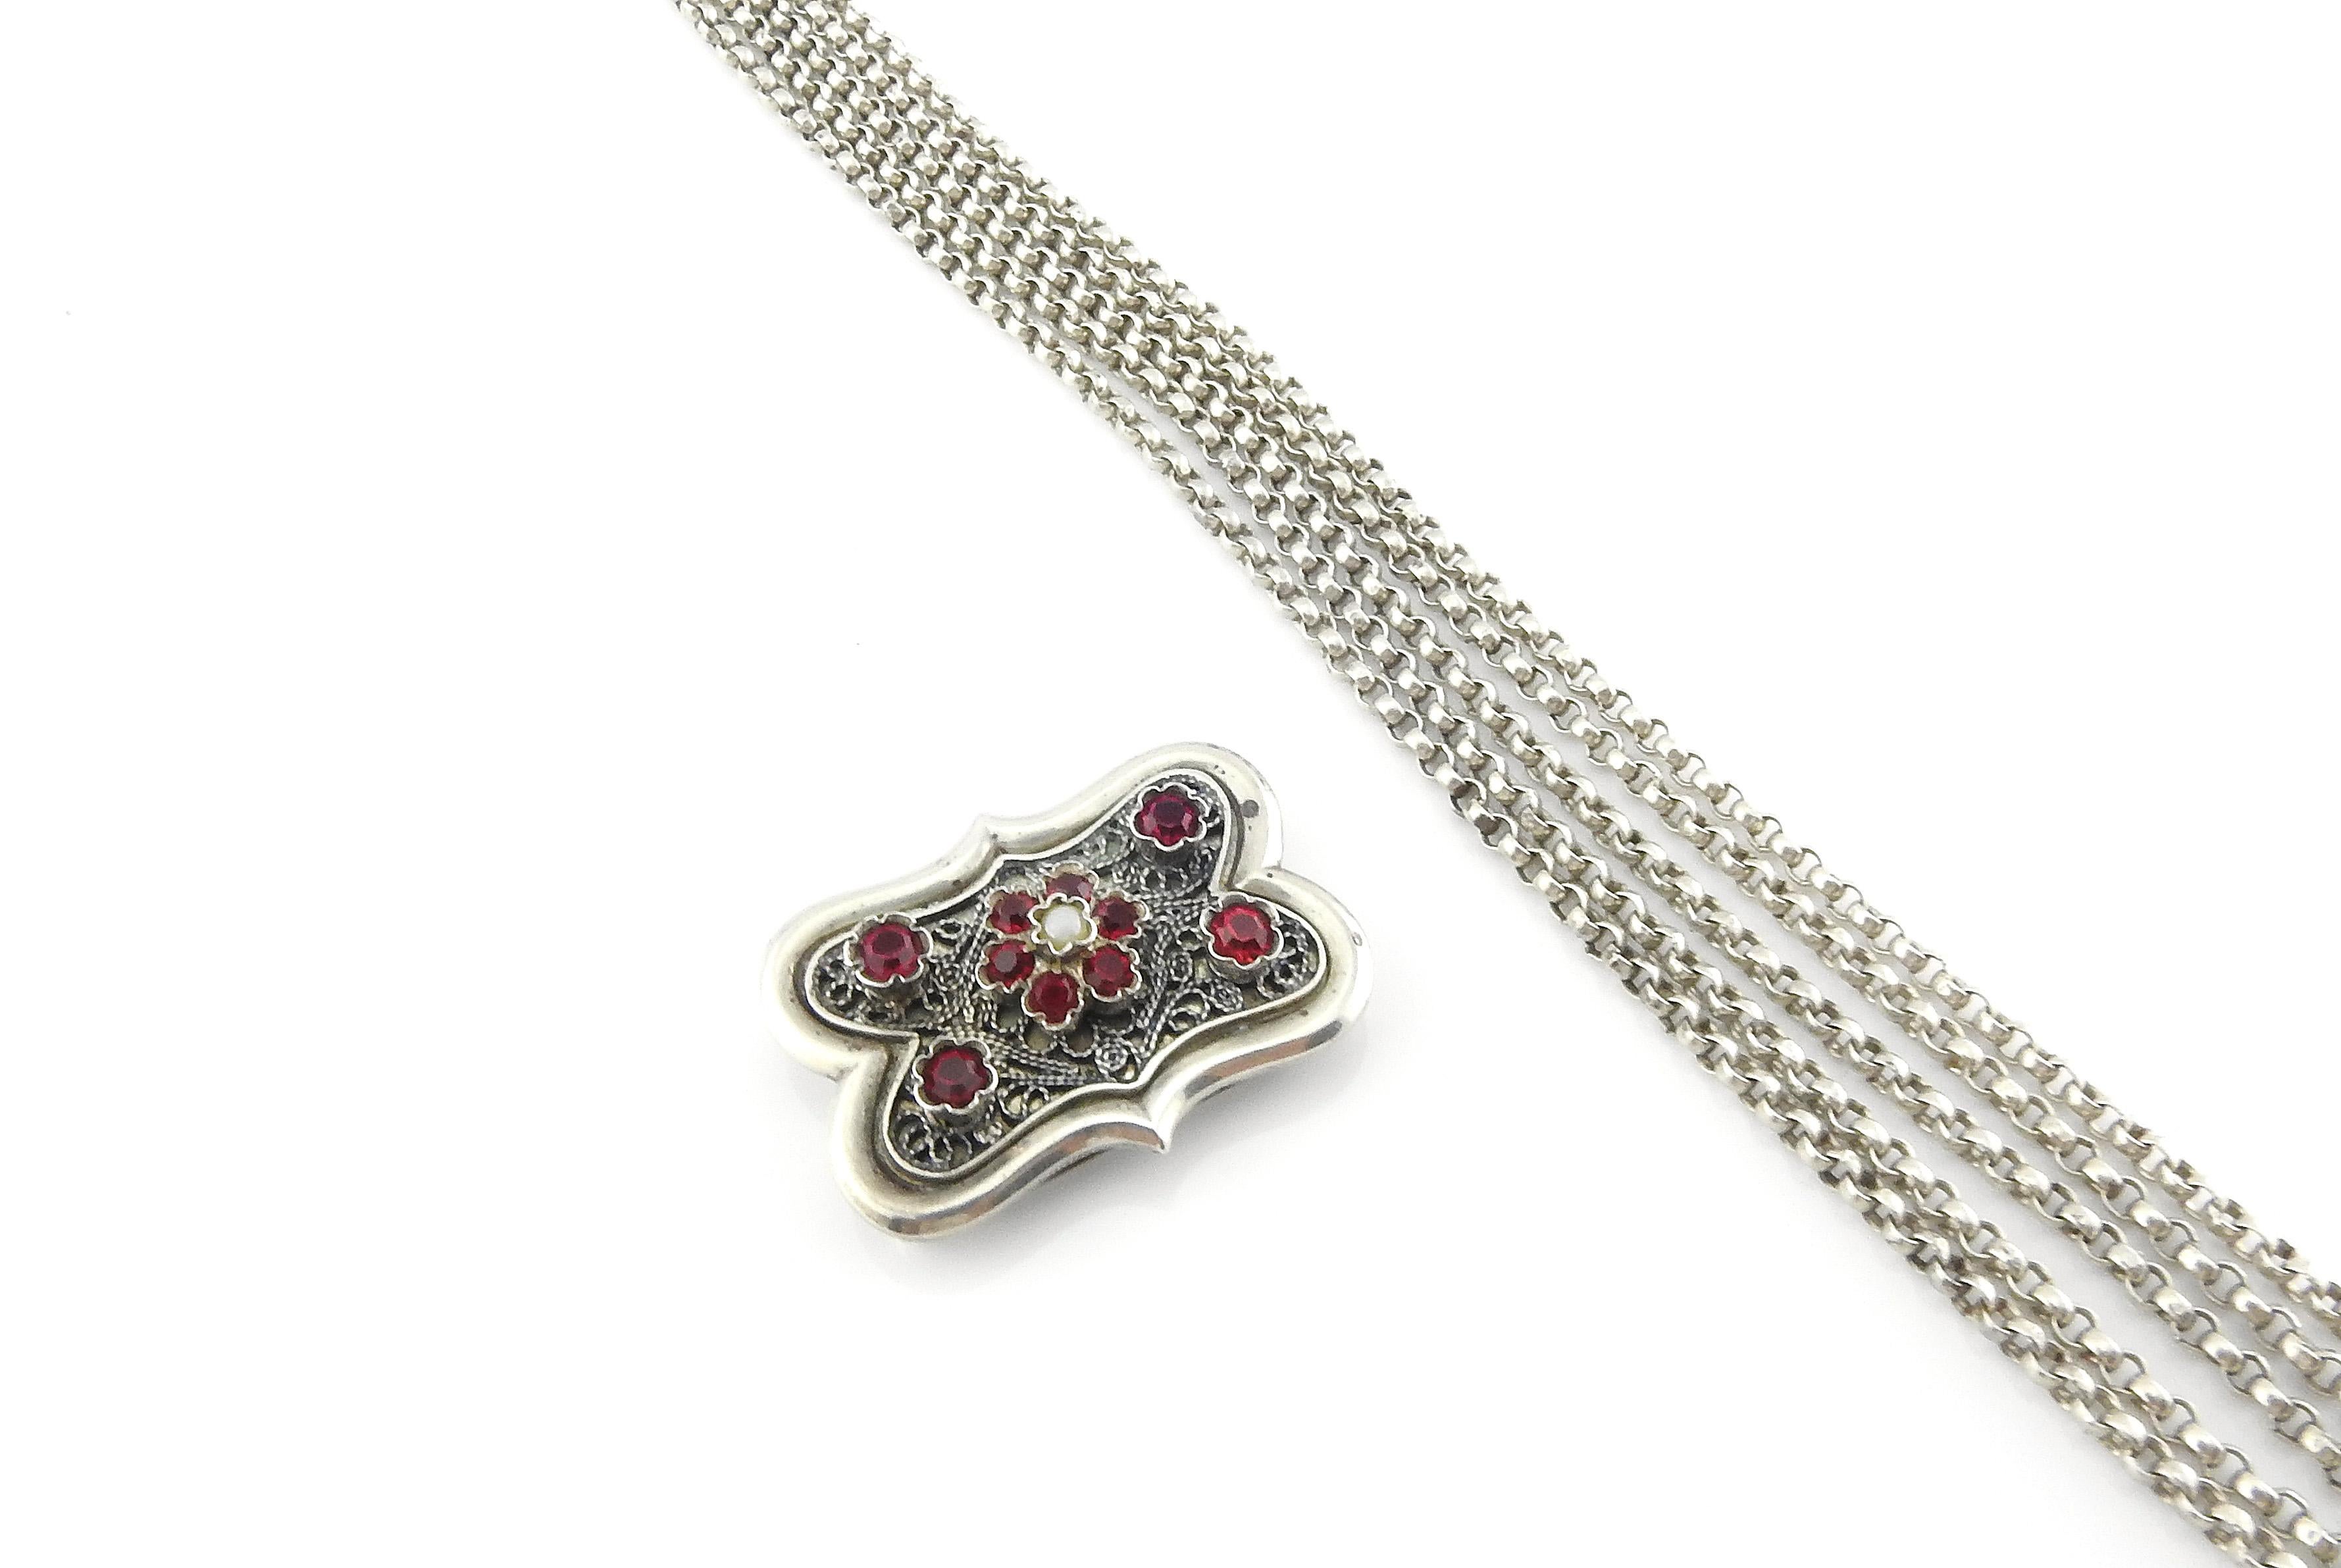 Austro Hungarian 835 silver multi strand clip off choker necklace with simulated rubies.

Victorian Era circa 1900.

Marked: 835.
Maker's or Assayer's mark of what appears to be: AGM conjoined.
Clasp and each slide is marked.

Measures: 14